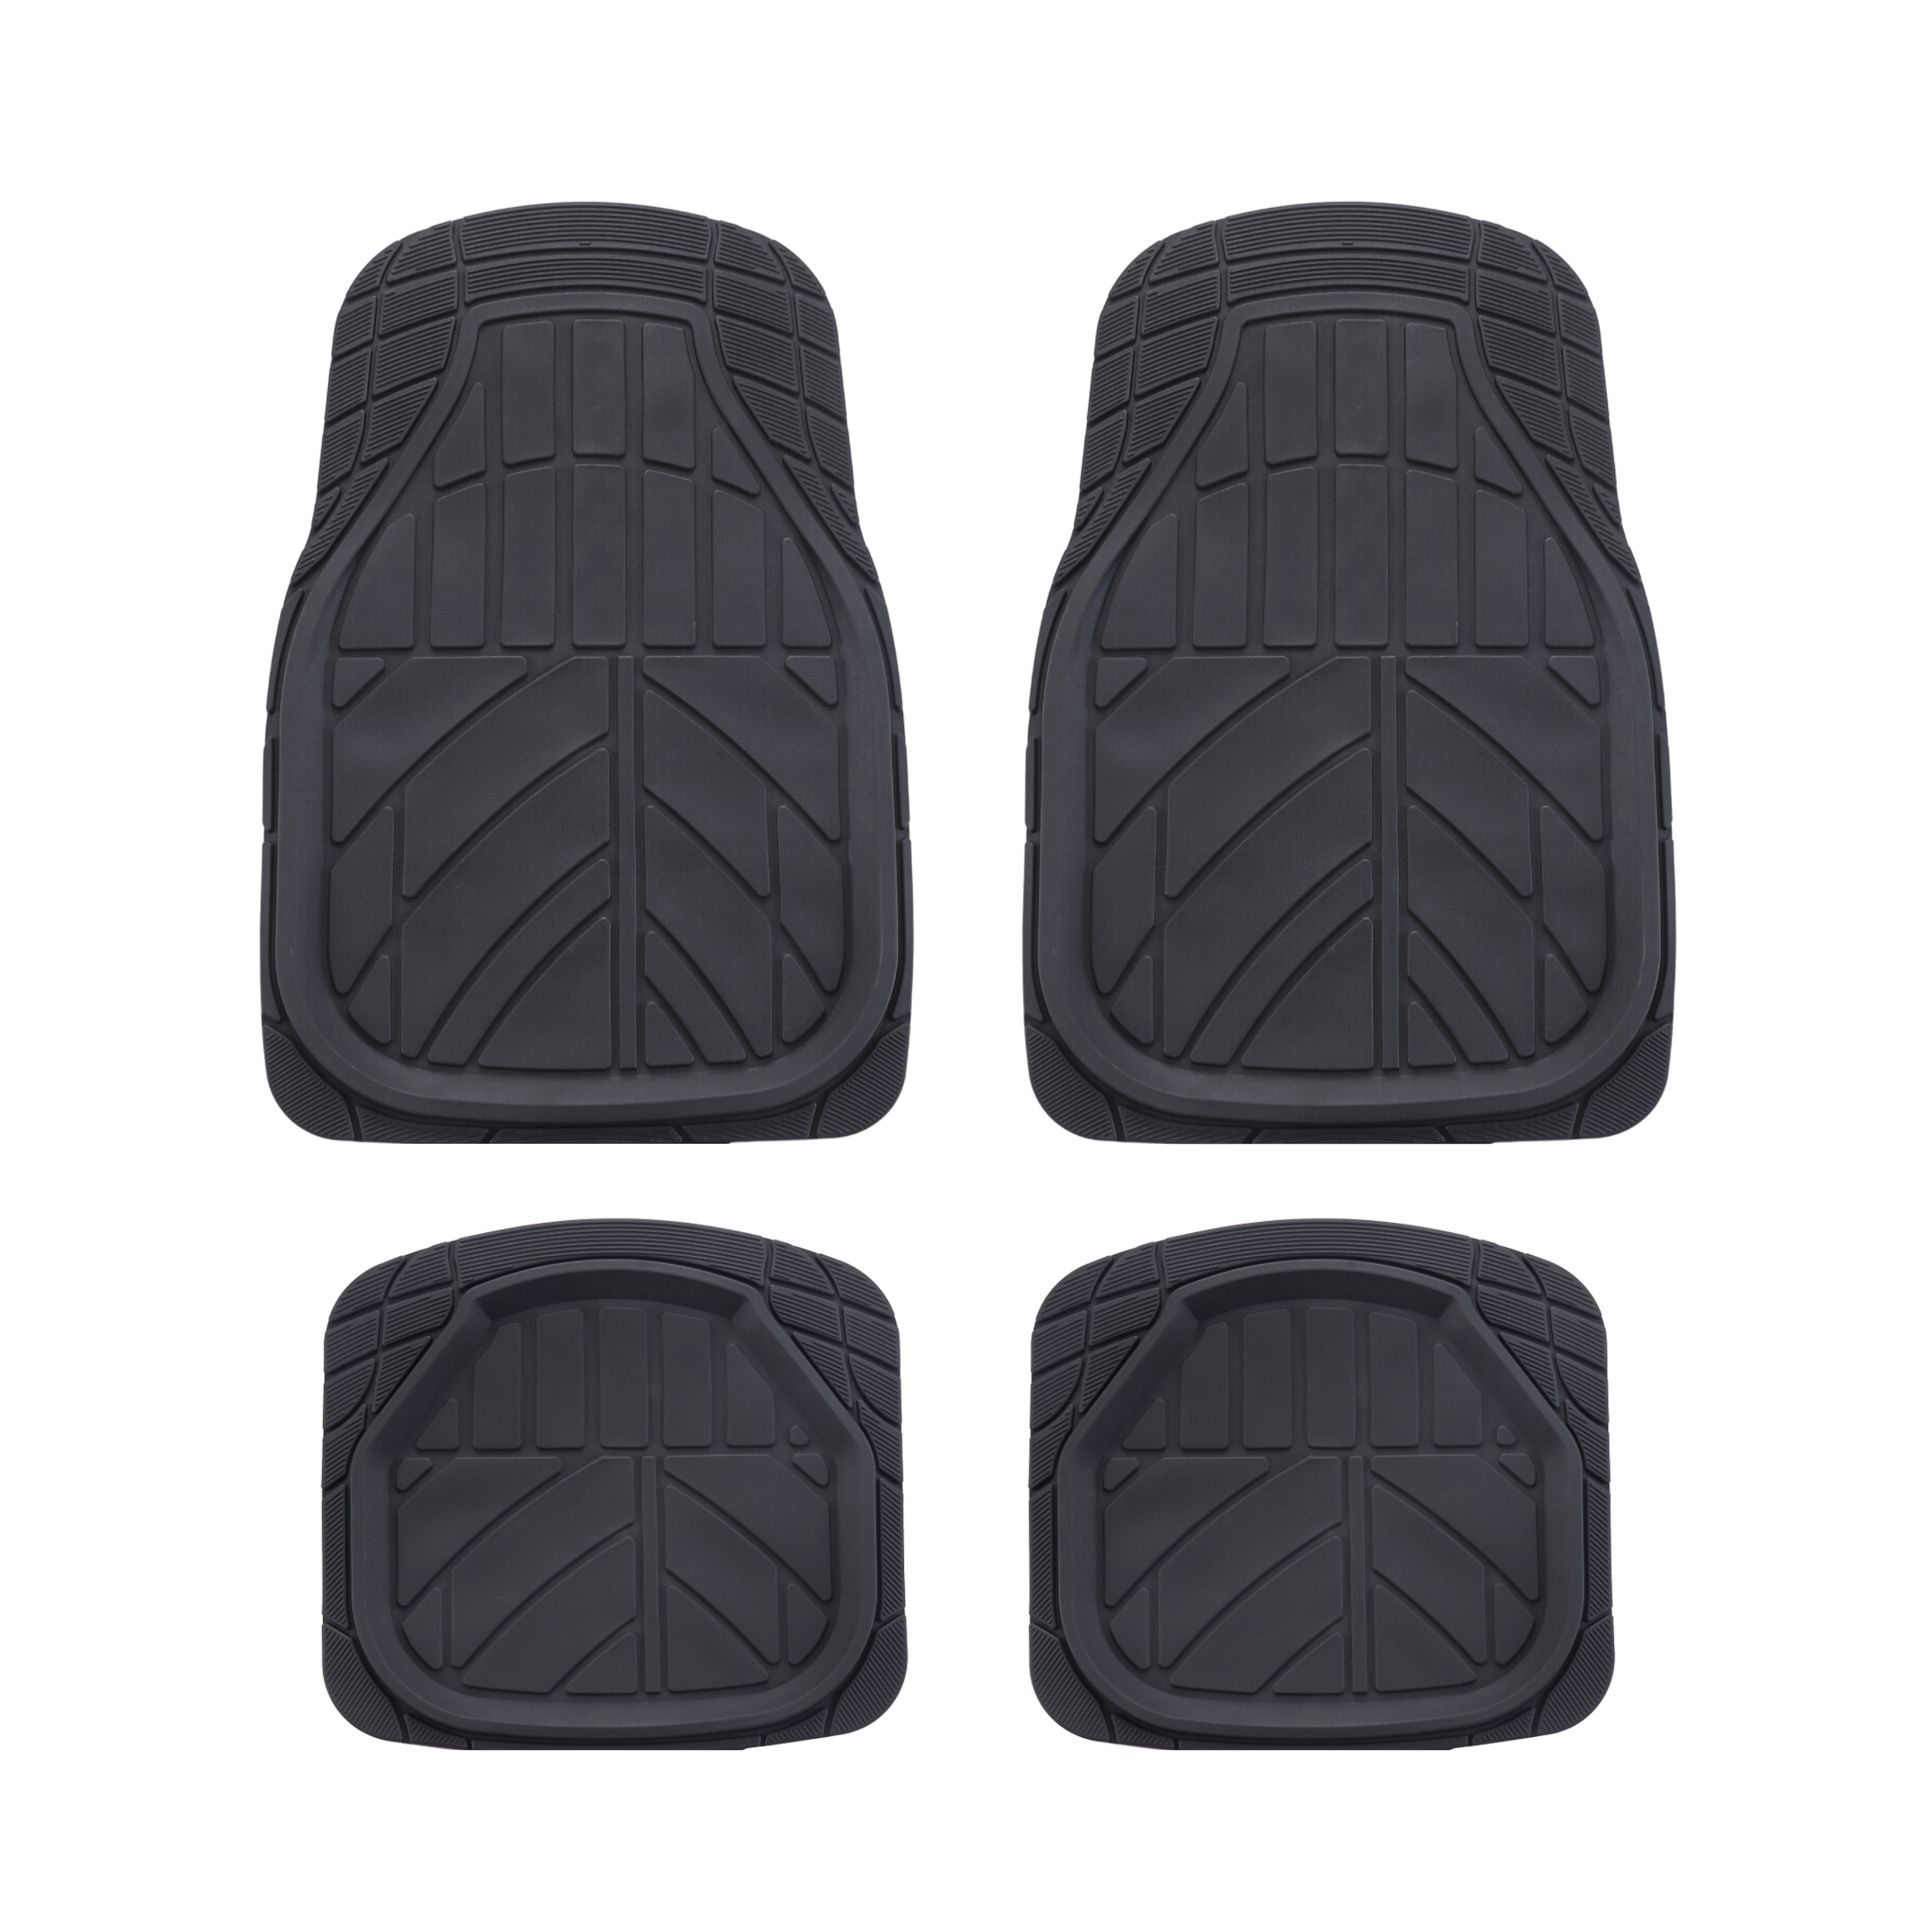 Durable All-Weather Floor Mats for Ultimate Protection